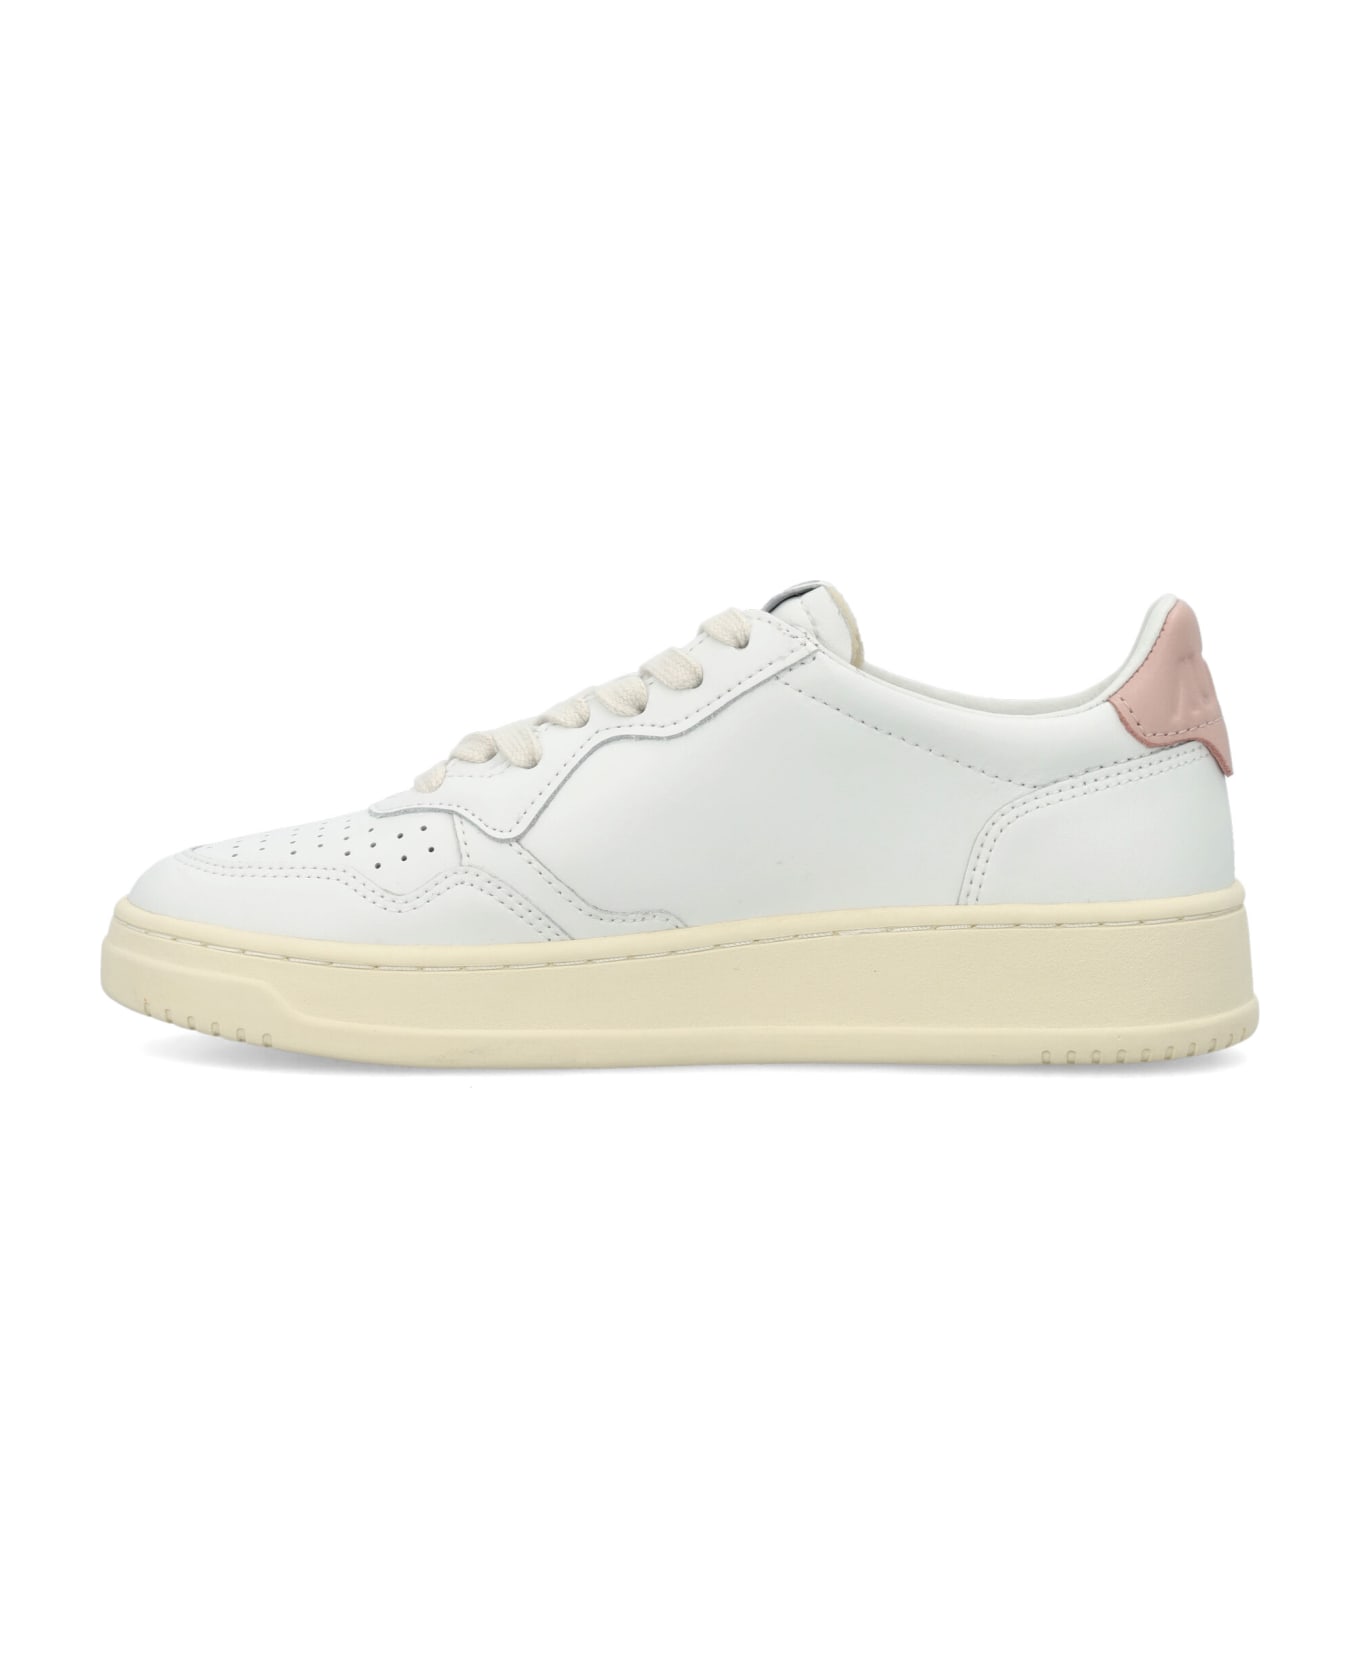 Autry Medalist Low Woman Sneakers - WHITE PINK